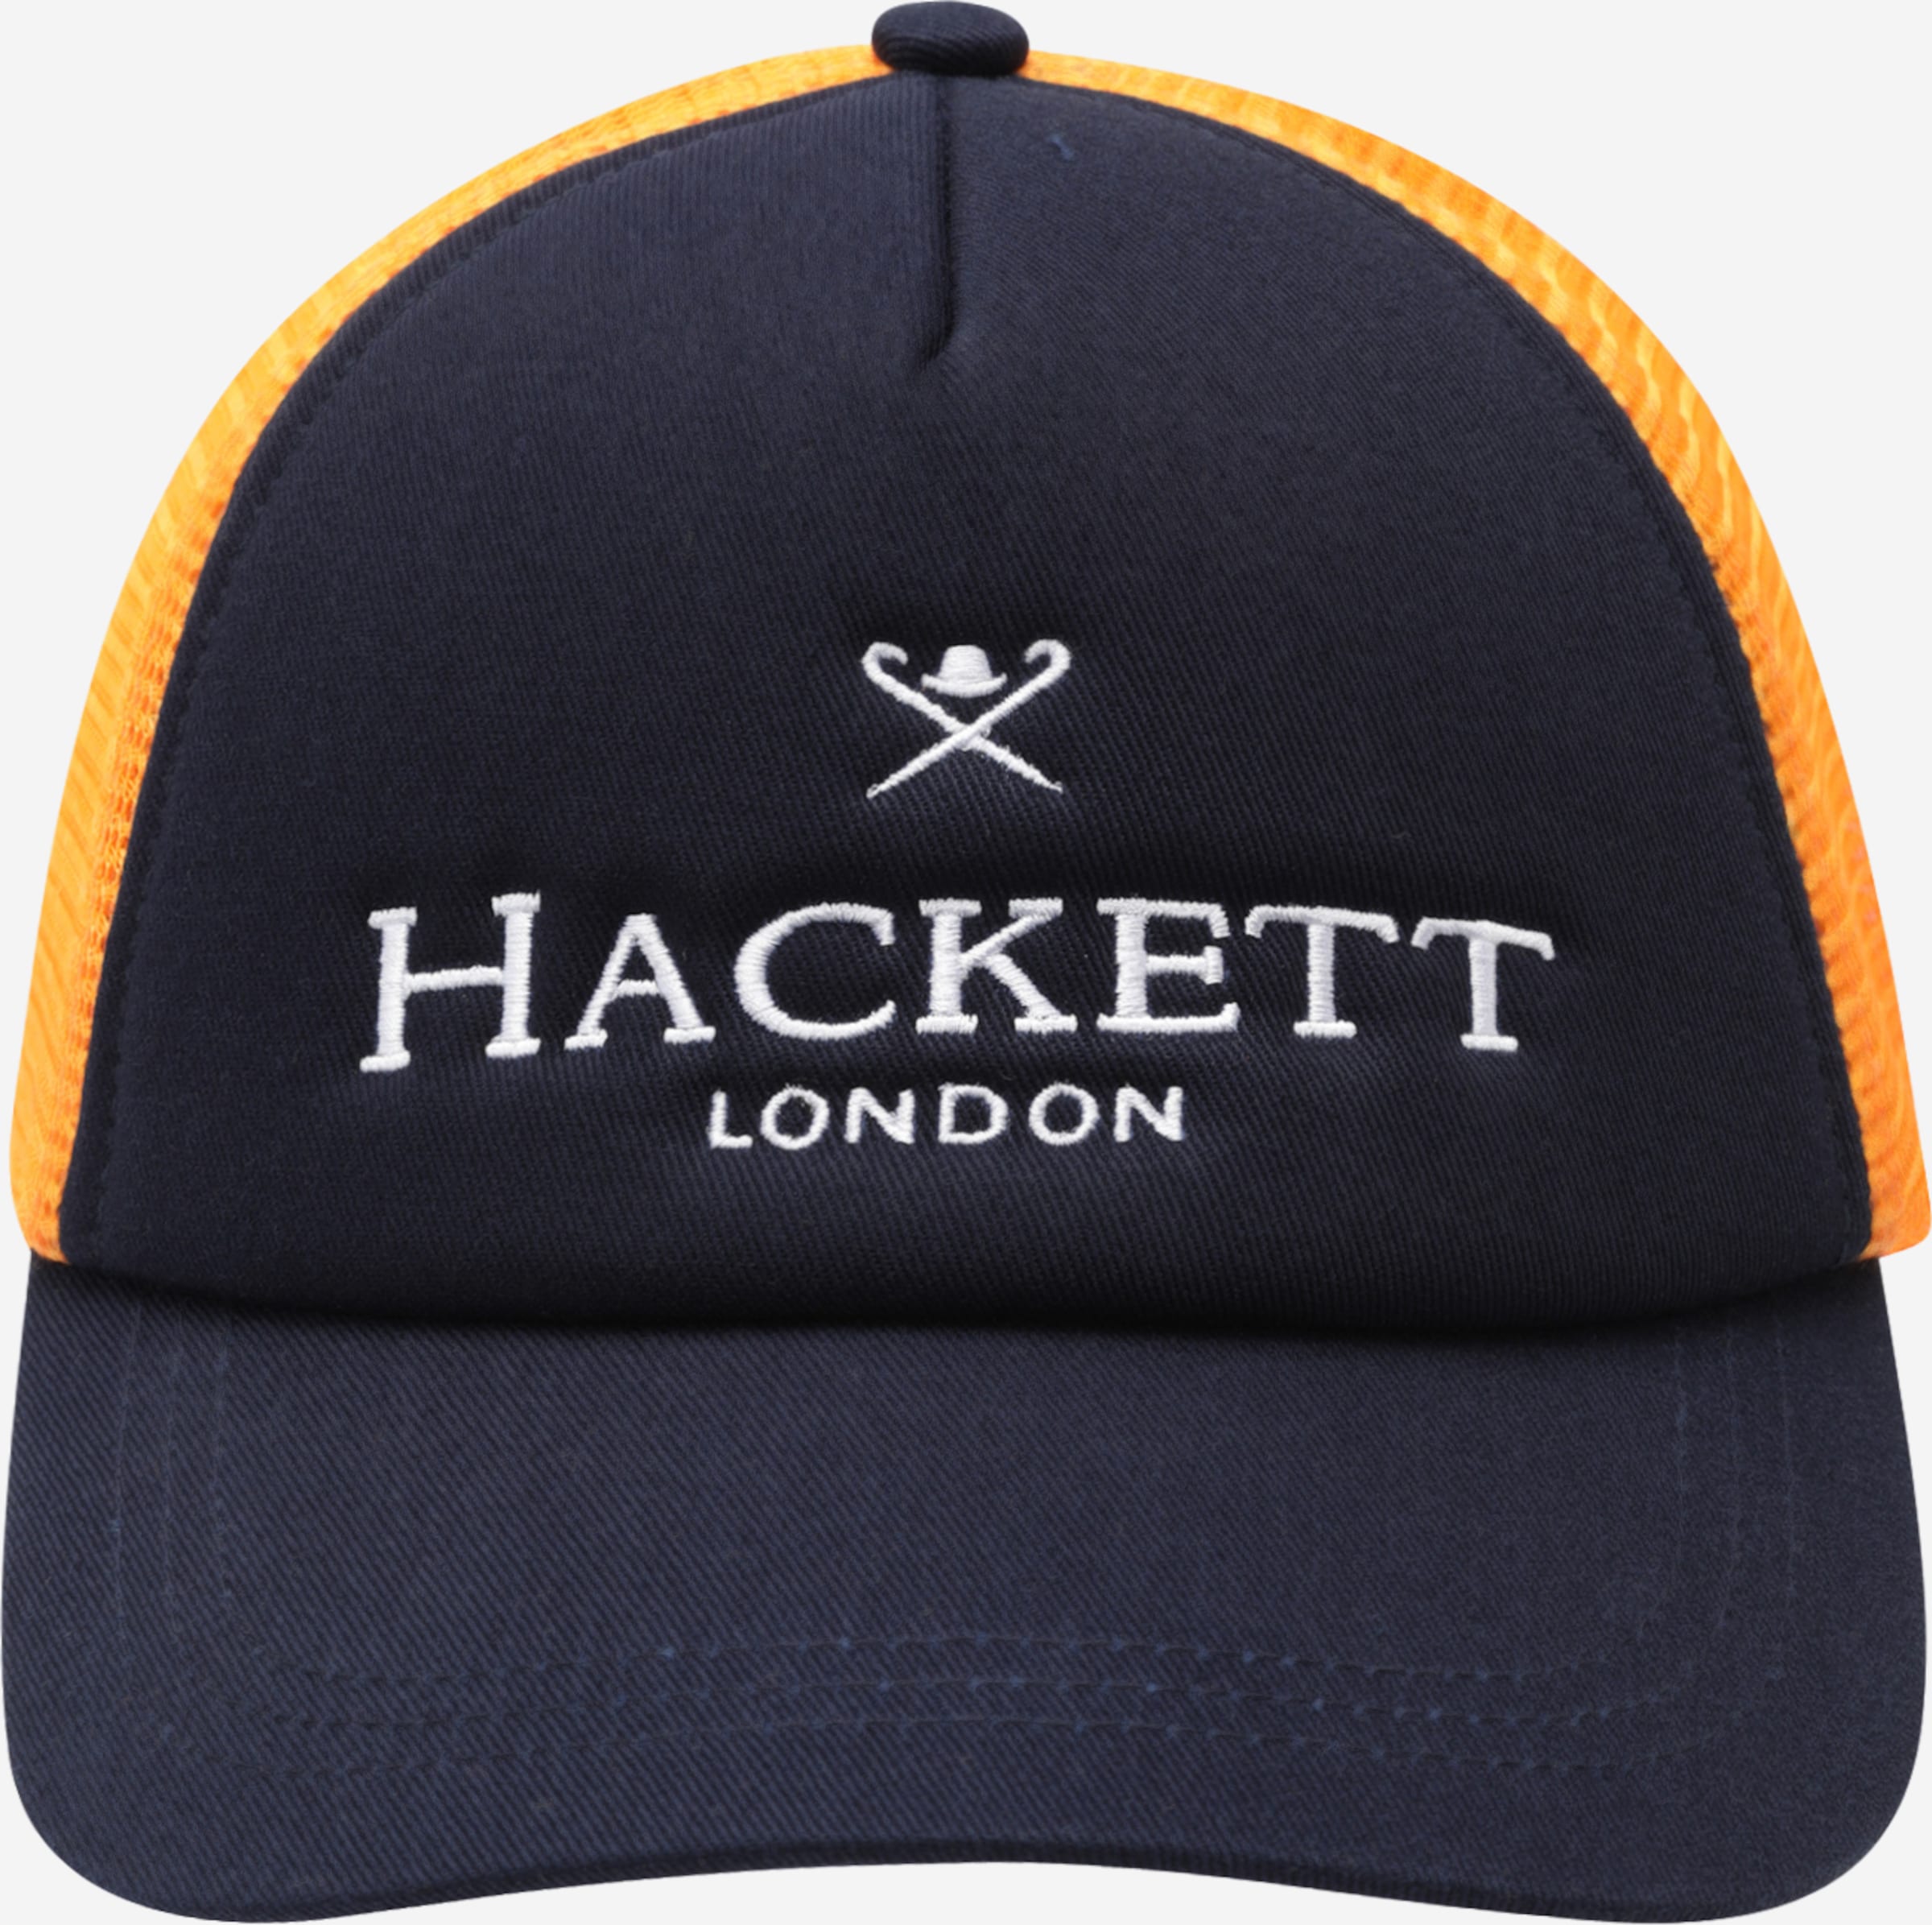 London Hat i ABOUT YOU